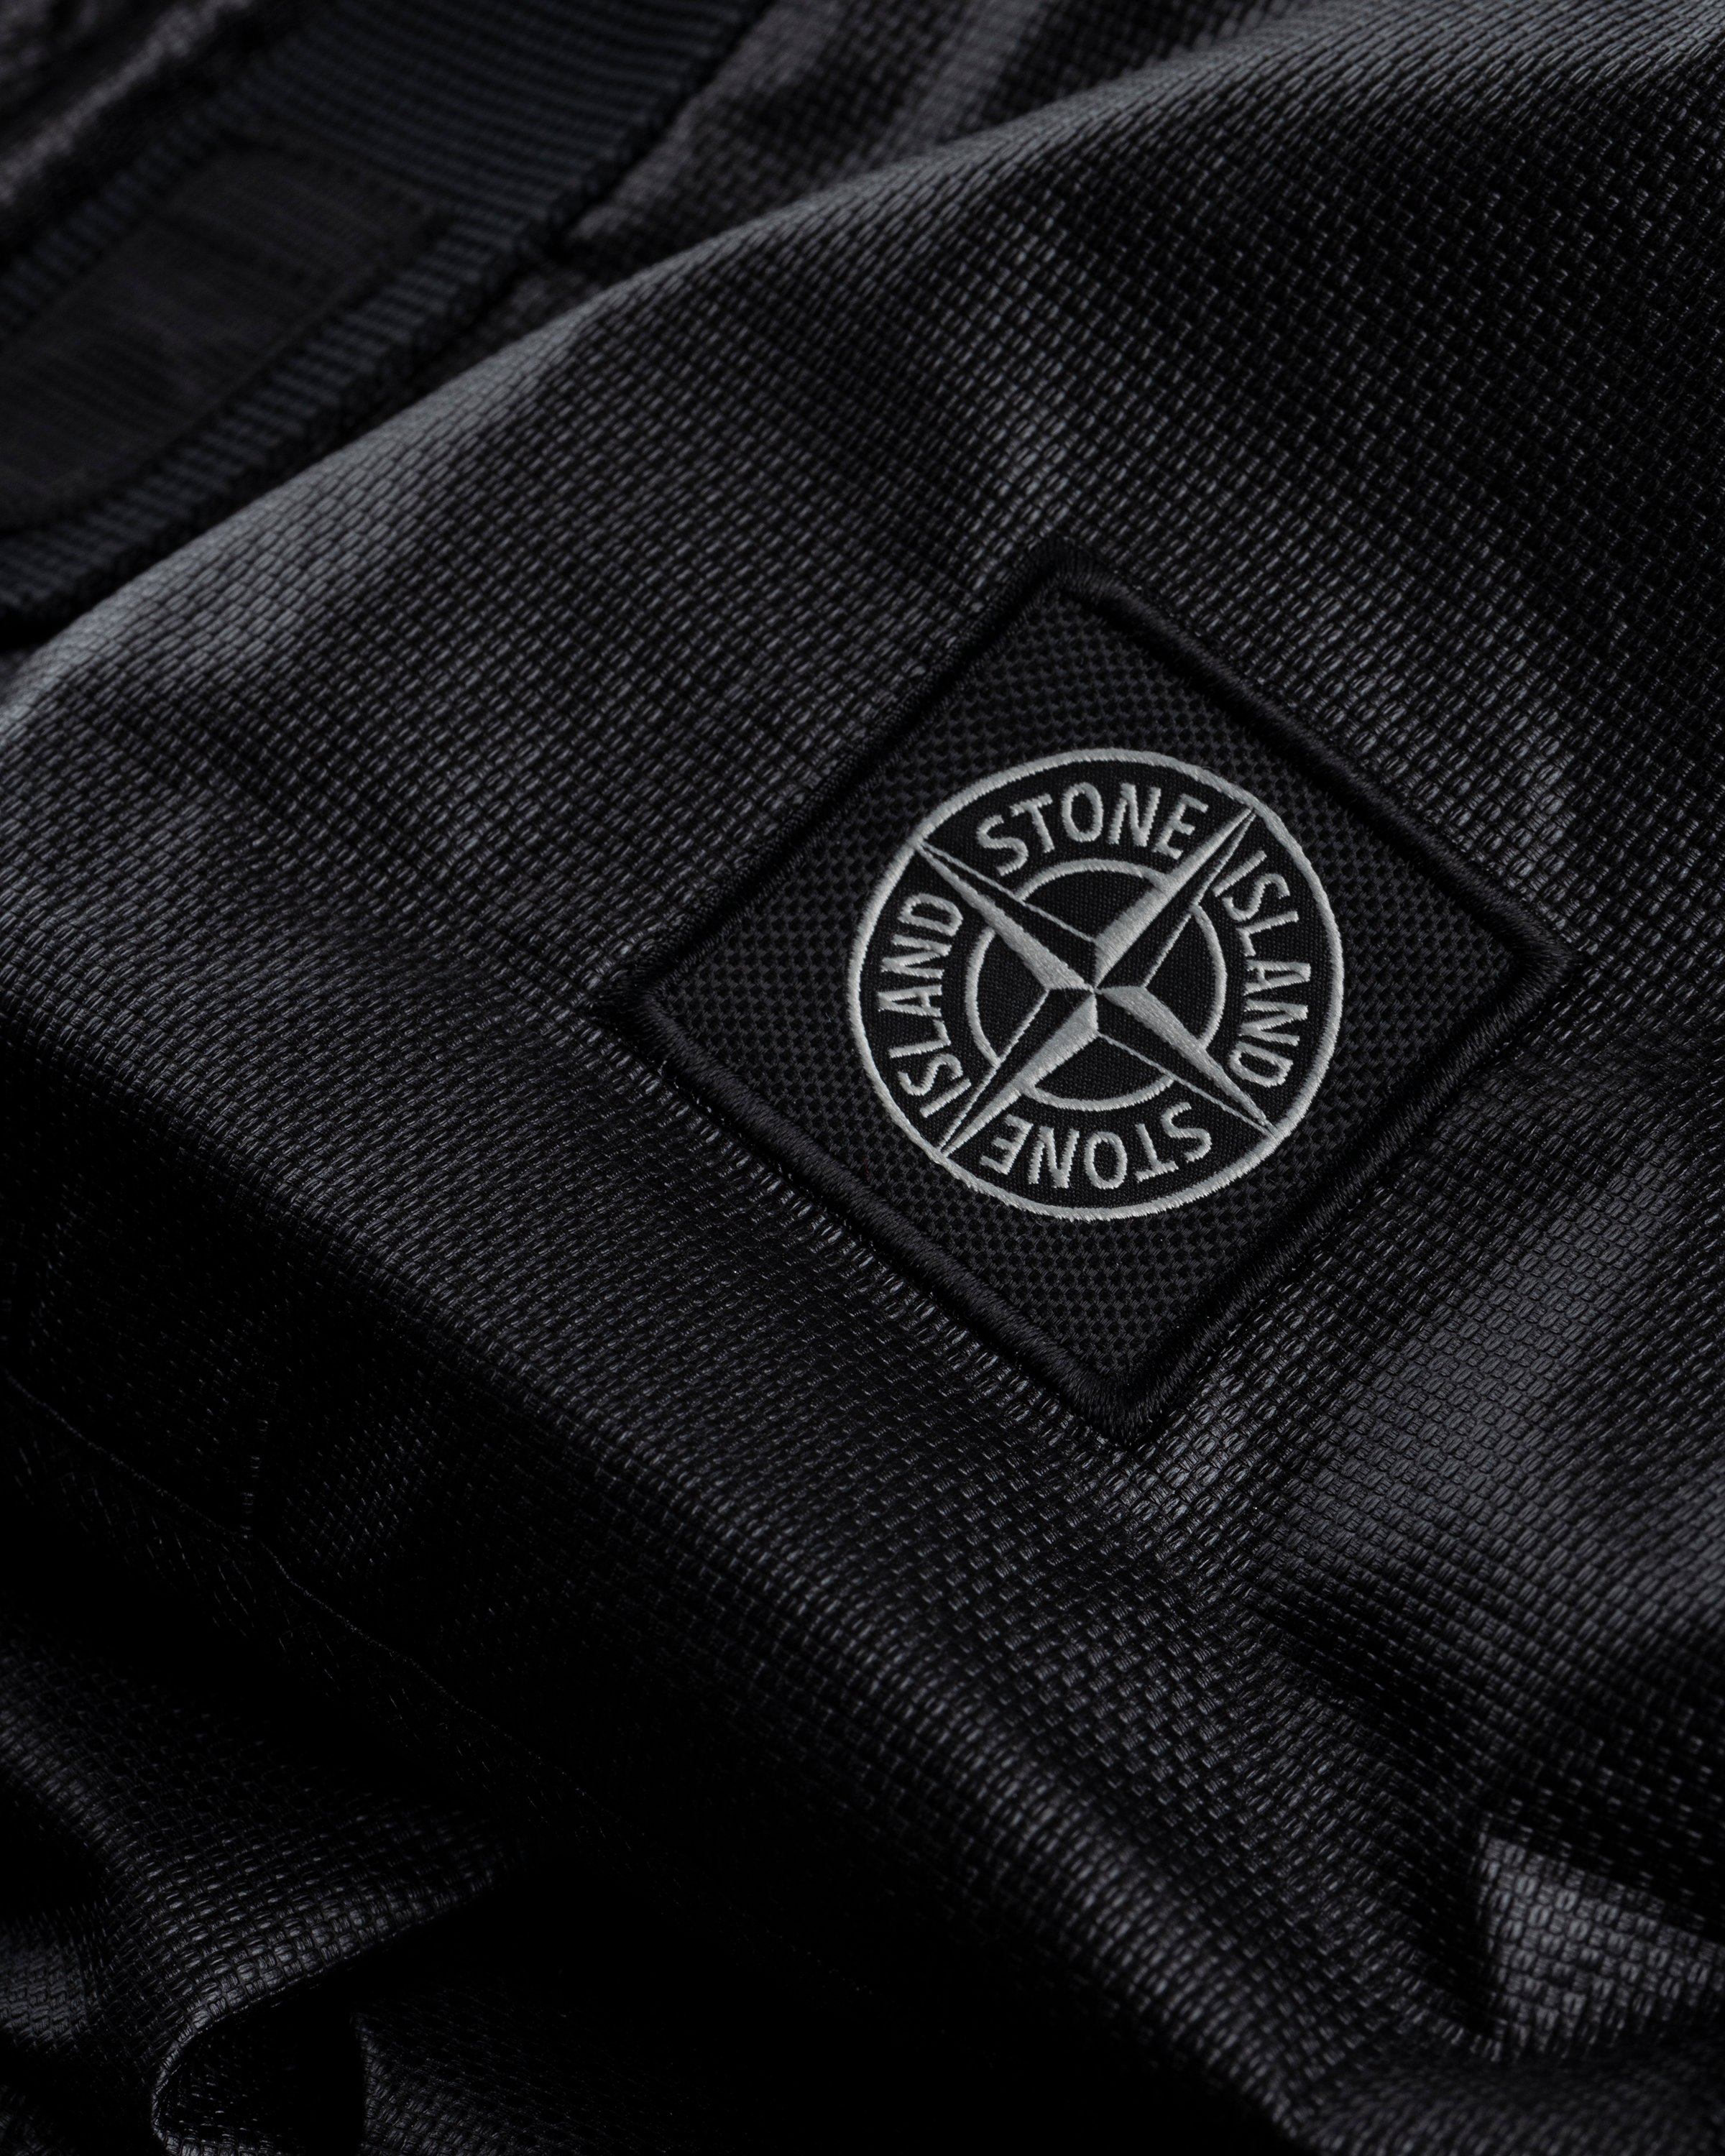 Stone Island - 90370 Dyed Backpack Black - Accessories - Black - Image 4